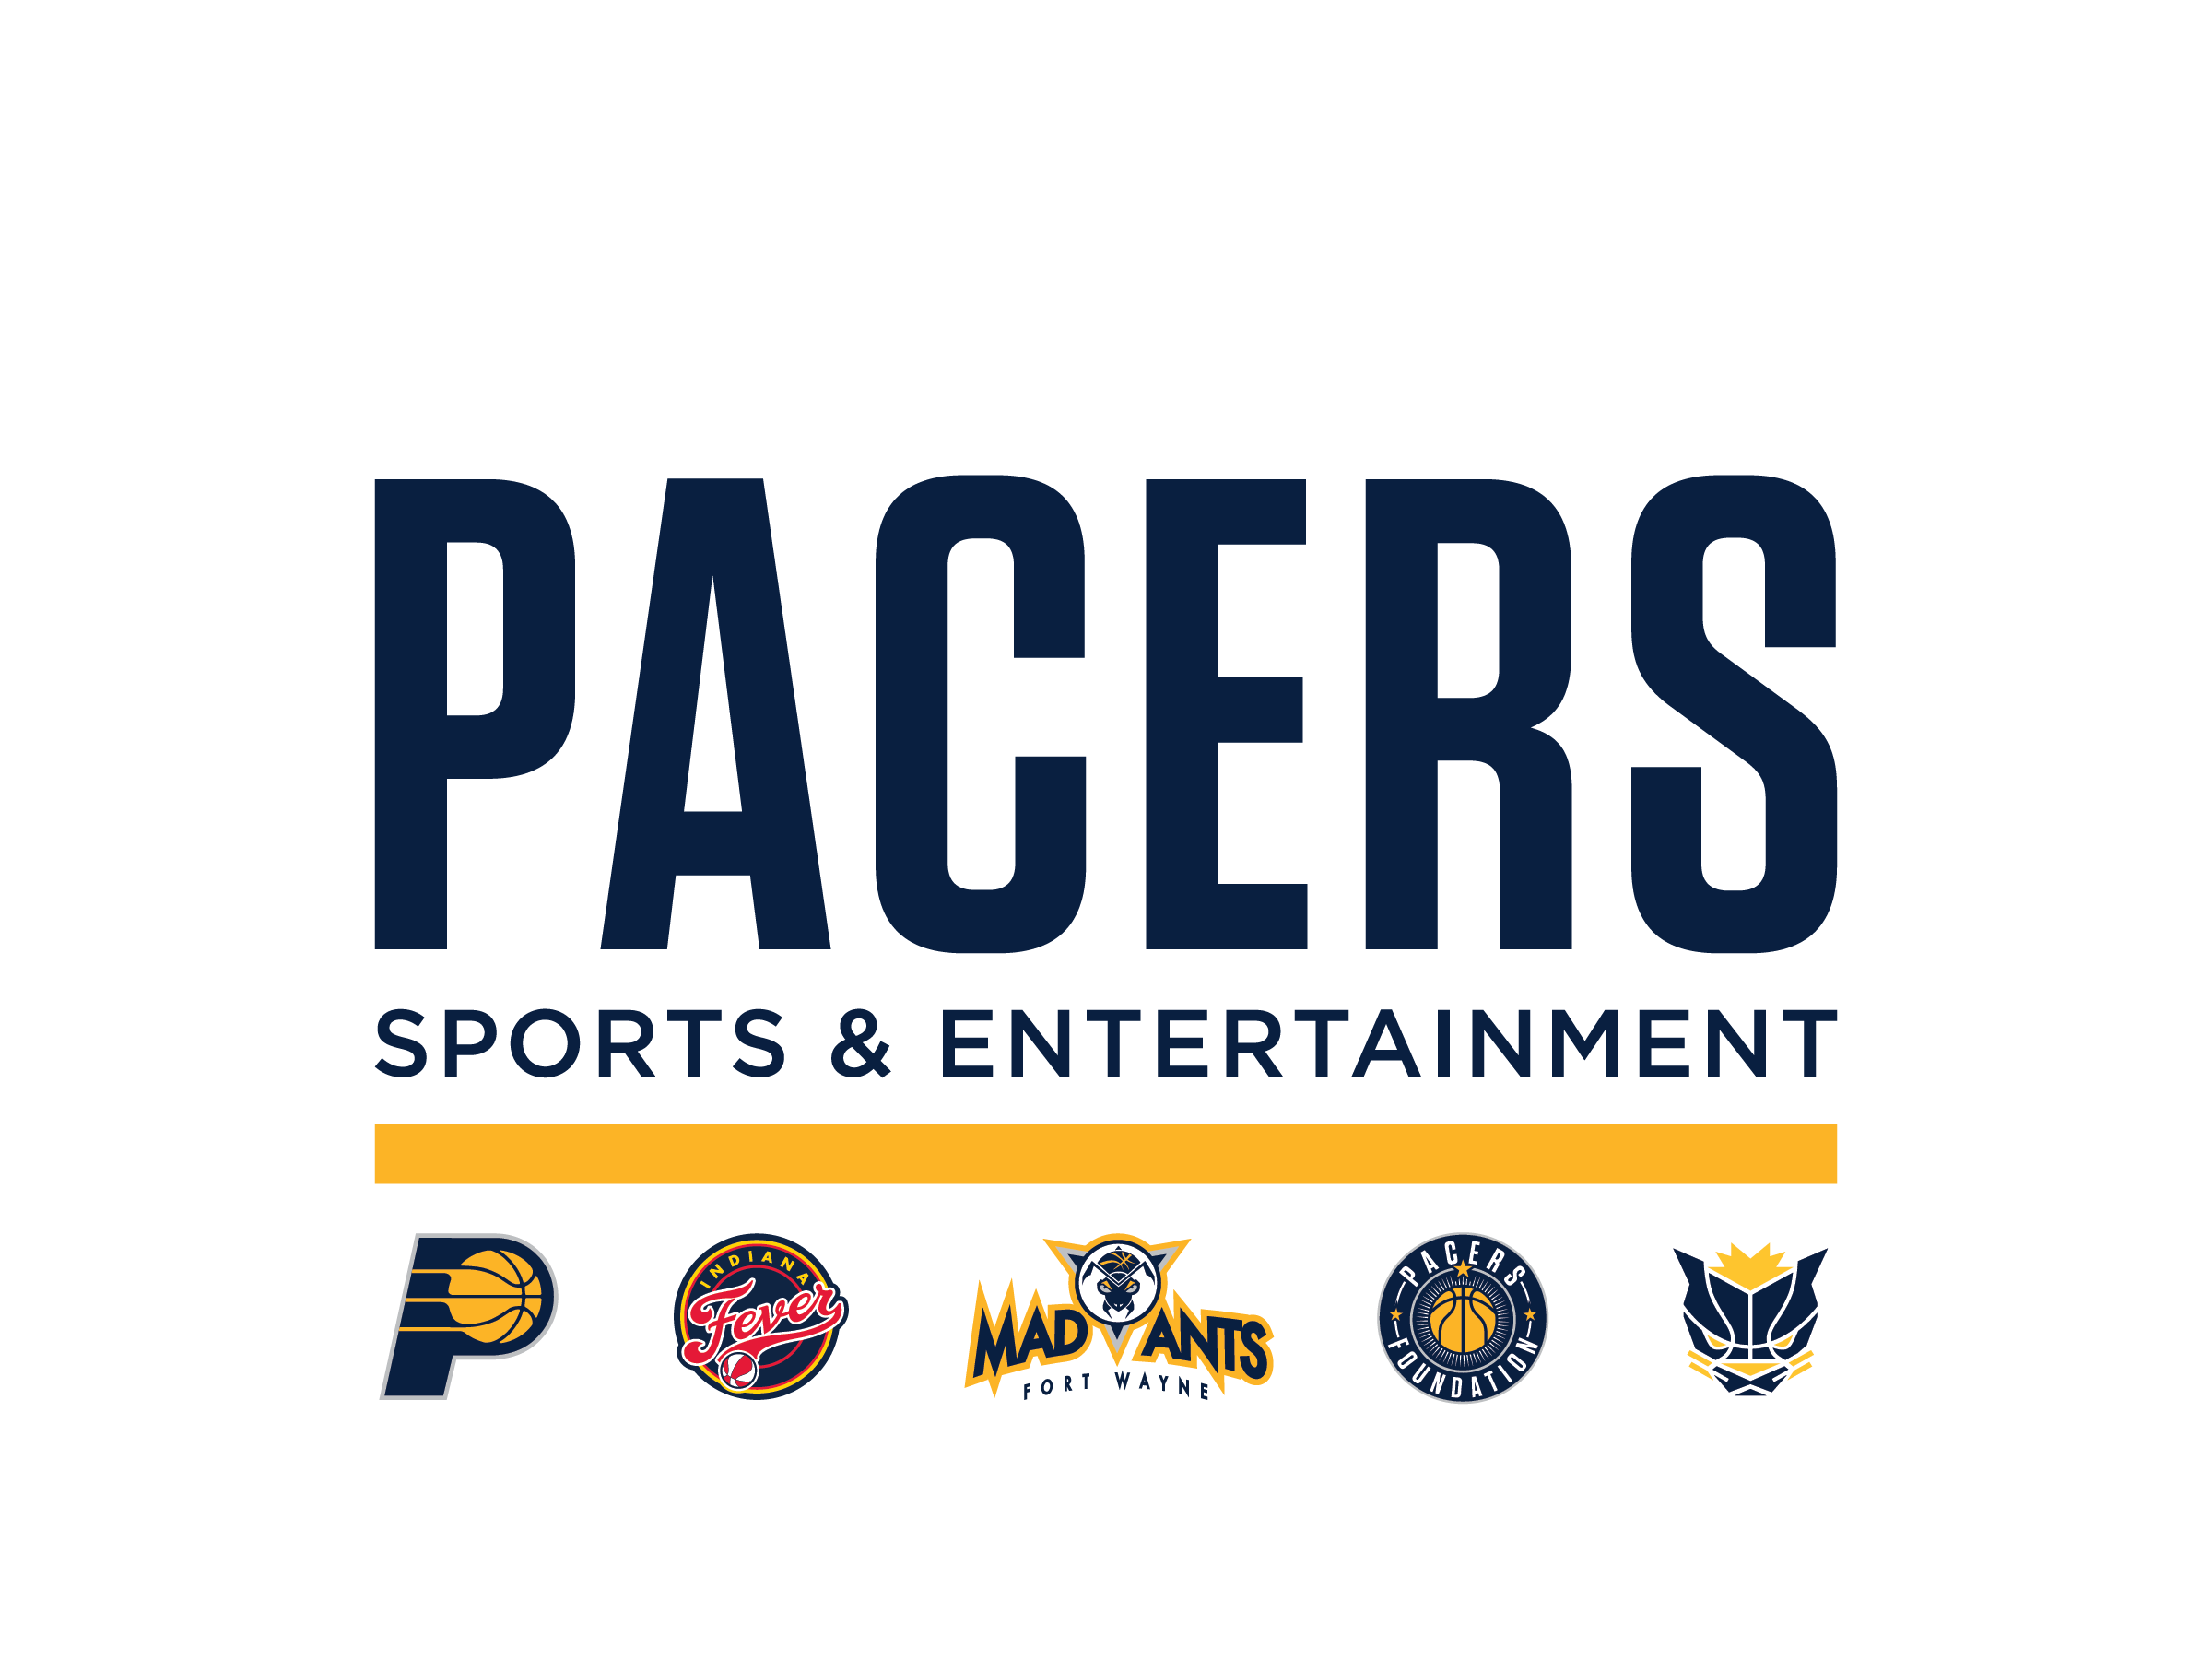 PACERS SPORTS AND ENTERTAINMENT